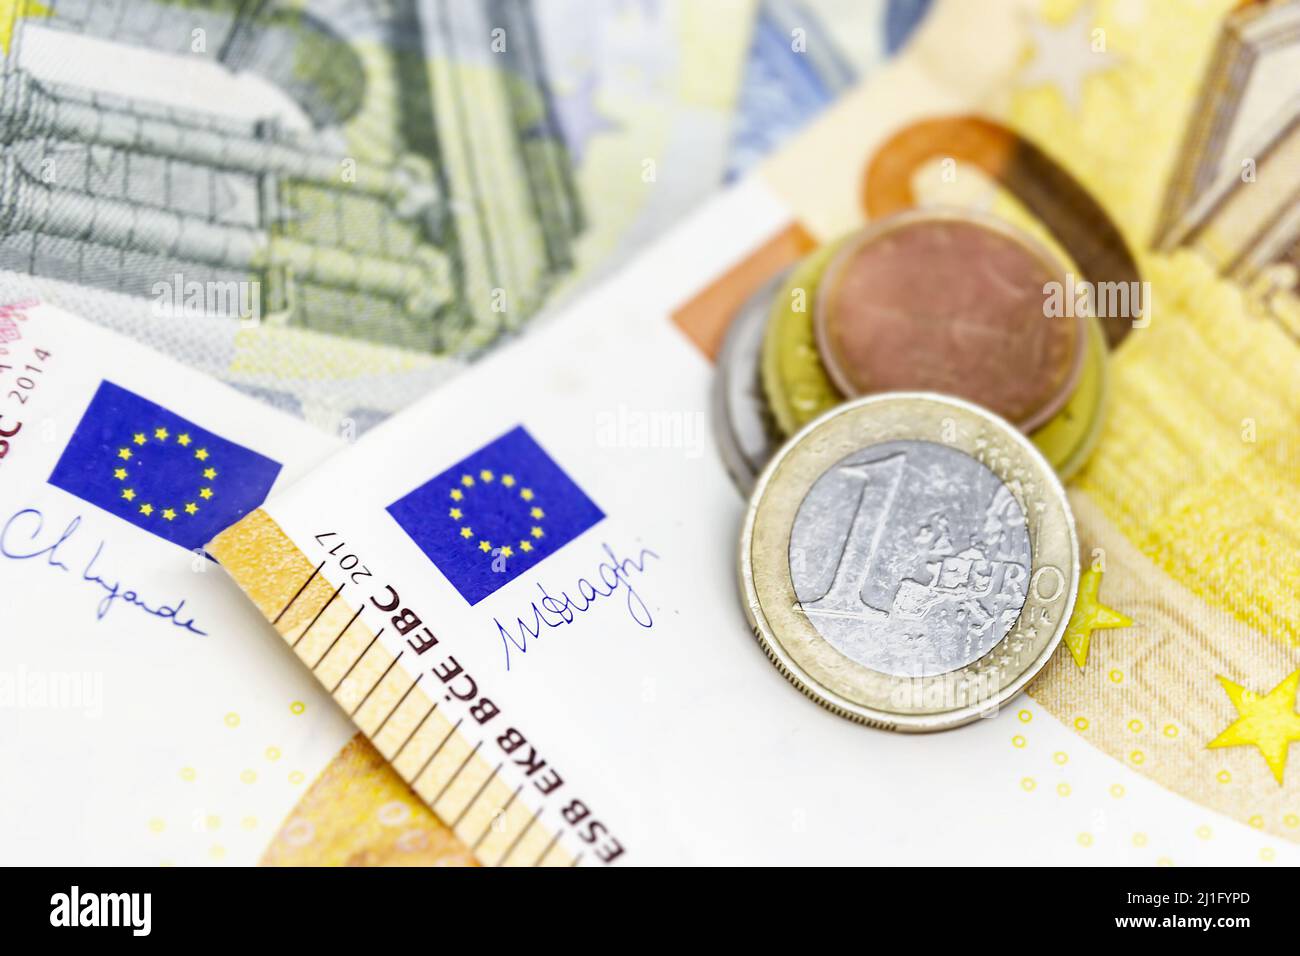 One euro coin over some banknotes of different values. The euro is the European currency. Finance, economy and business. Cash and savings Stock Photo